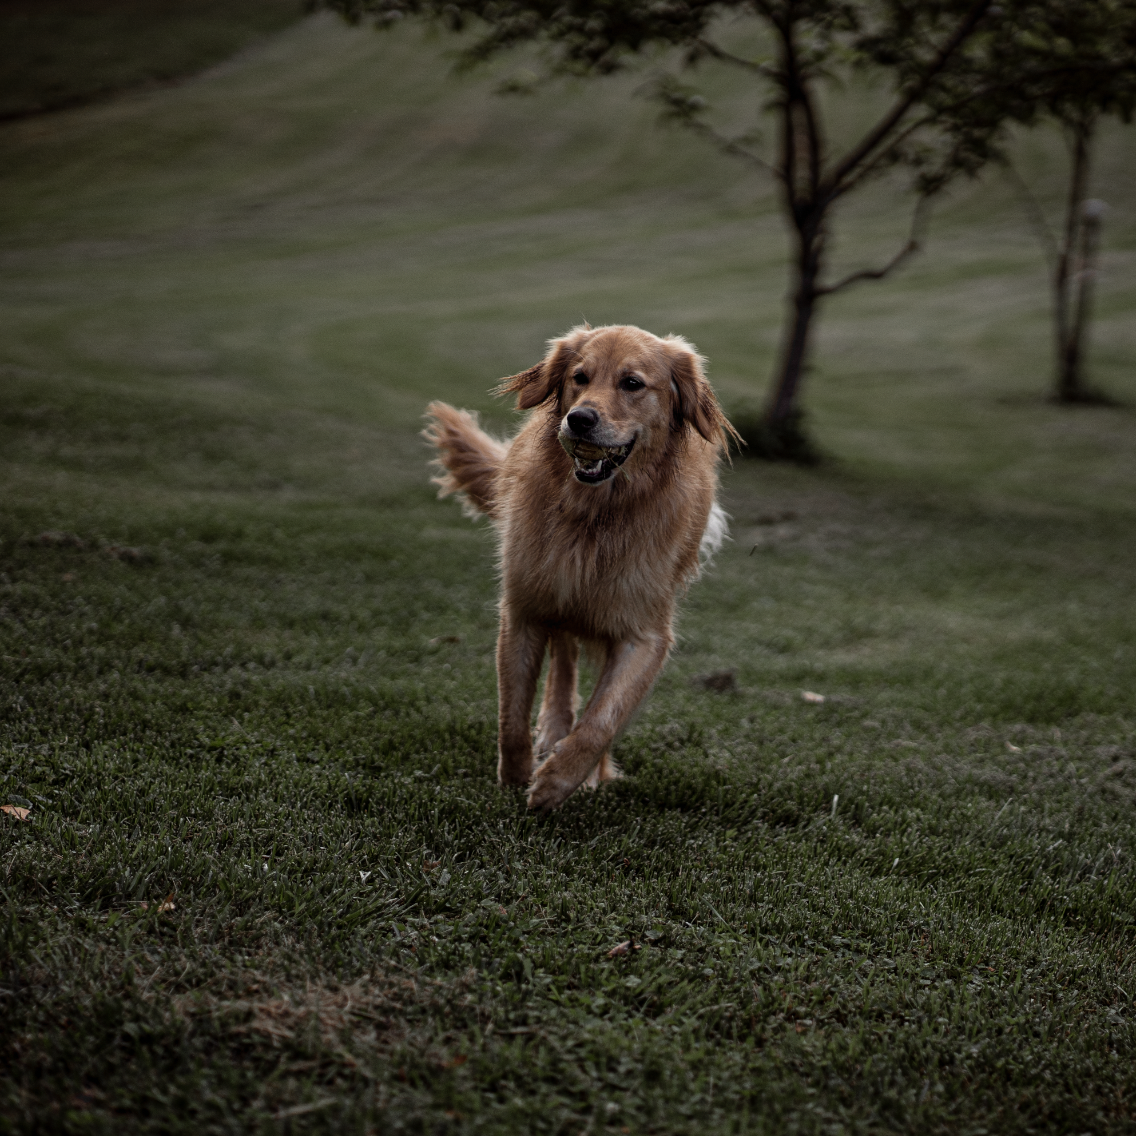 Golden retriever running with a ball in its mouth